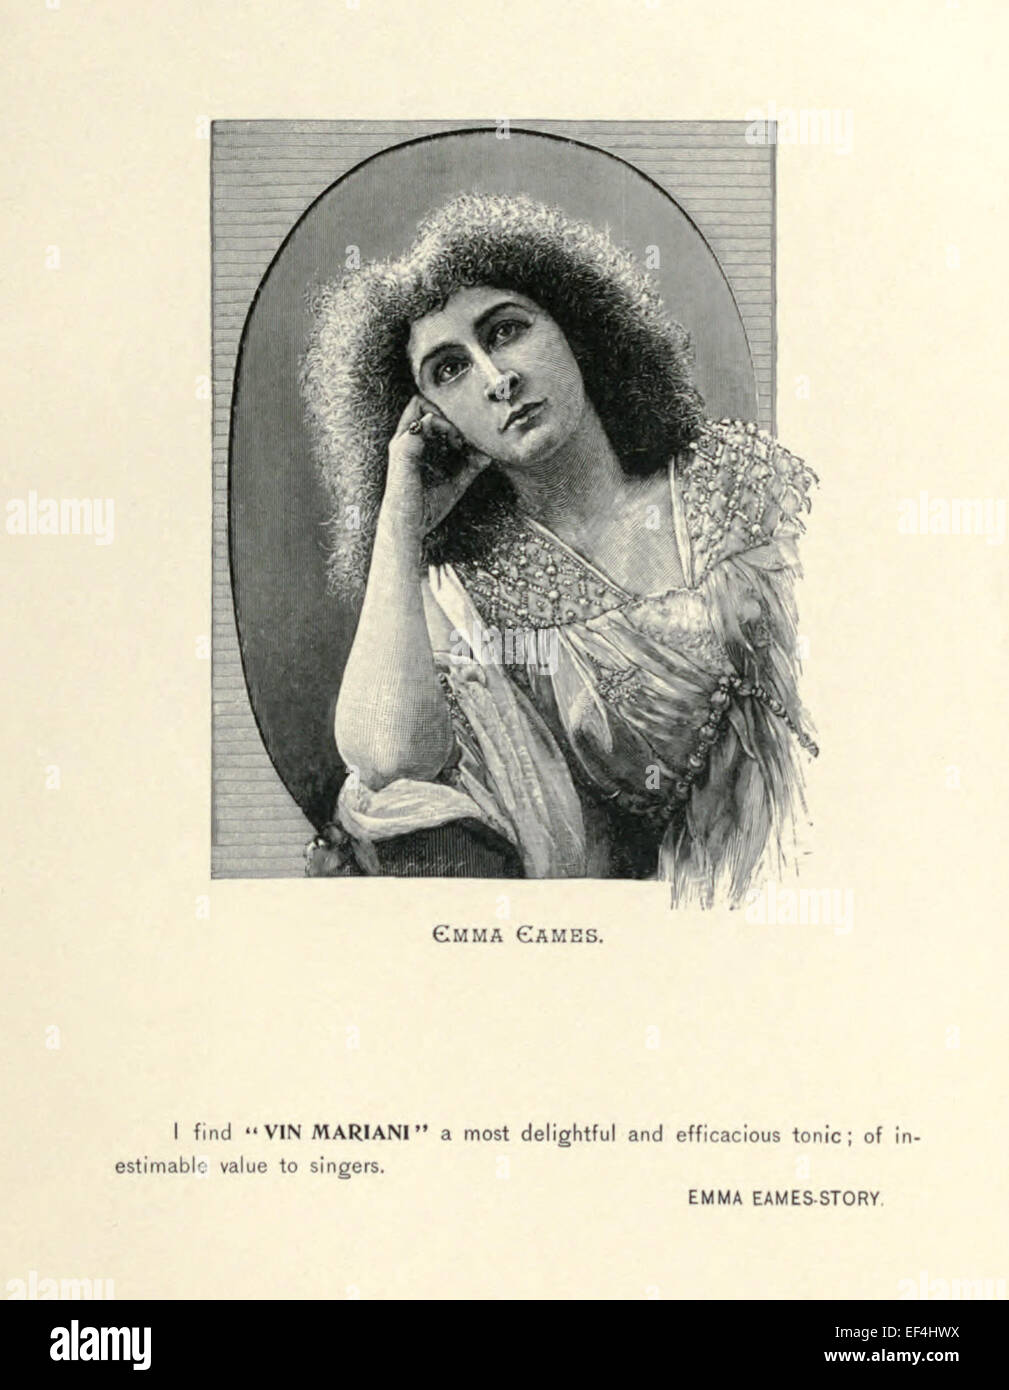 Emma Eames (1865-1952) American soprano endorsement of 'Vin Mariani', the original Coca wine containing cocaine and popular with singers and artists. See description for more information. Stock Photo